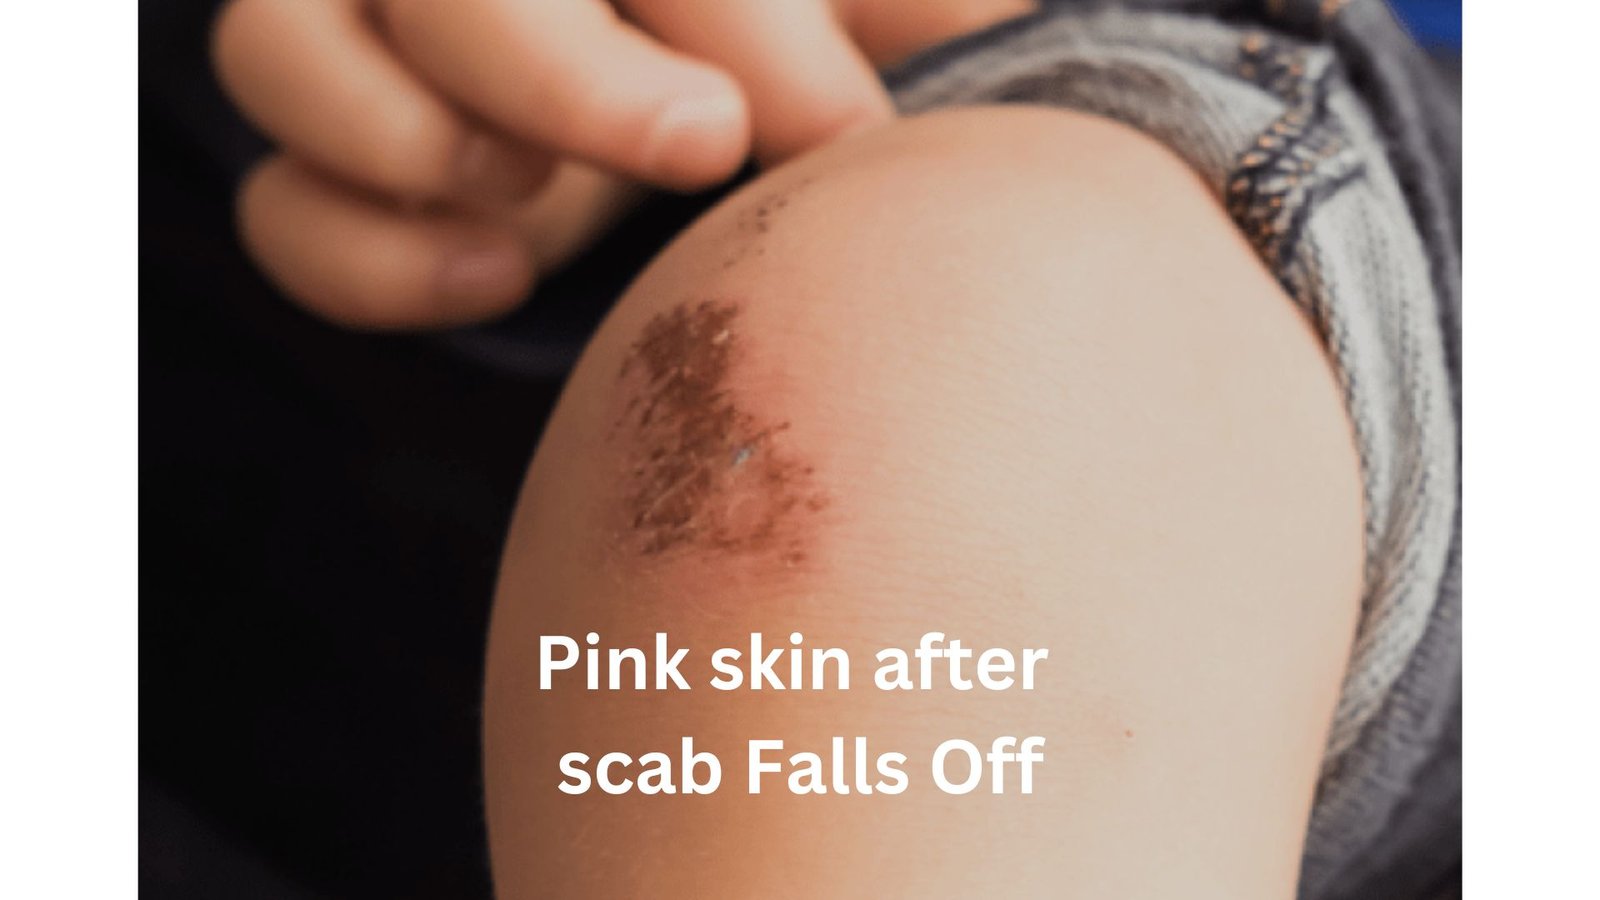 Treat pink skin after scab falls